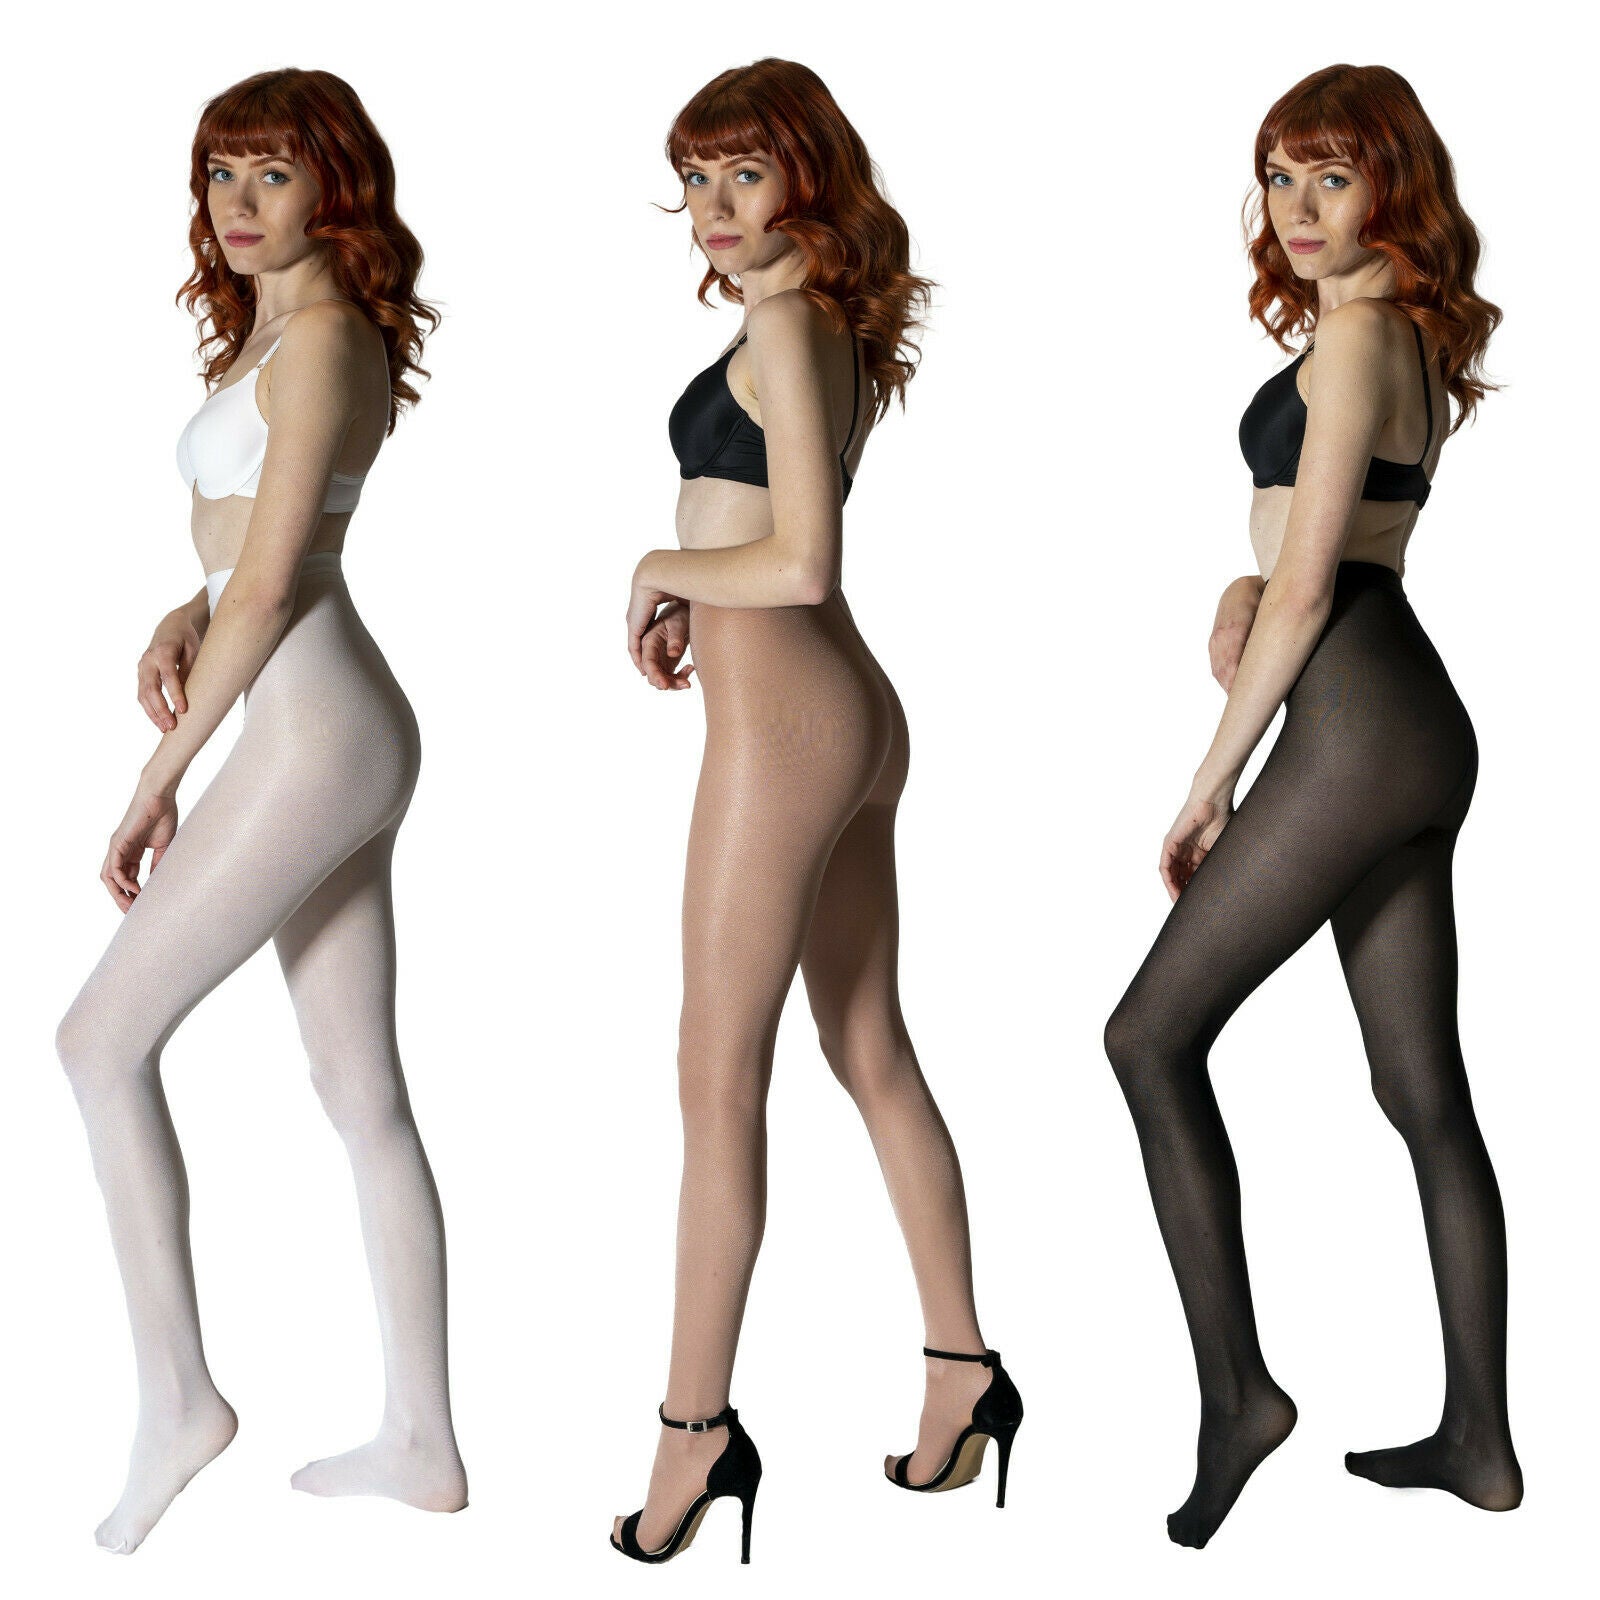 Peavey, Accessories, B2 Hooters Footed High Gloss Tights Skin Tone Size B  Fits 5356 Up To 35lbs